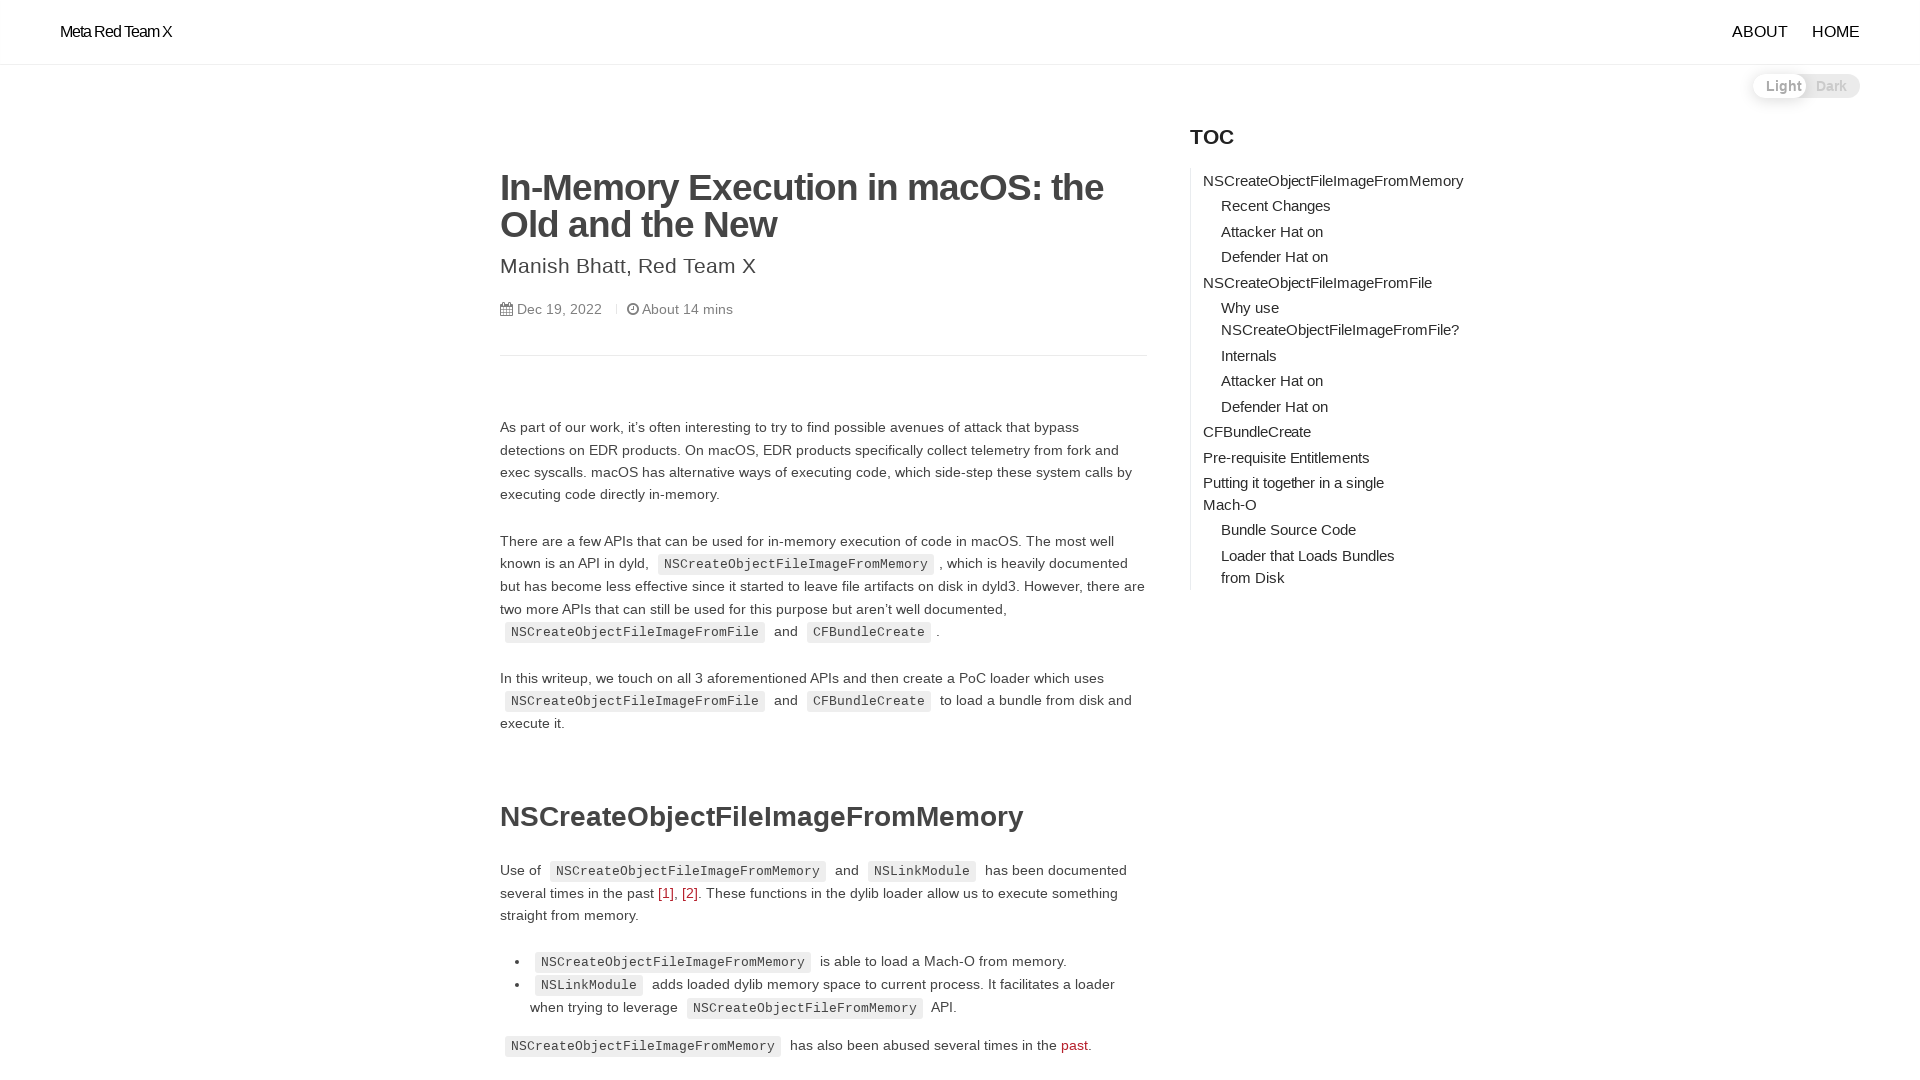 In-Memory Execution in macOS: the Old and the New | Meta Red Team X